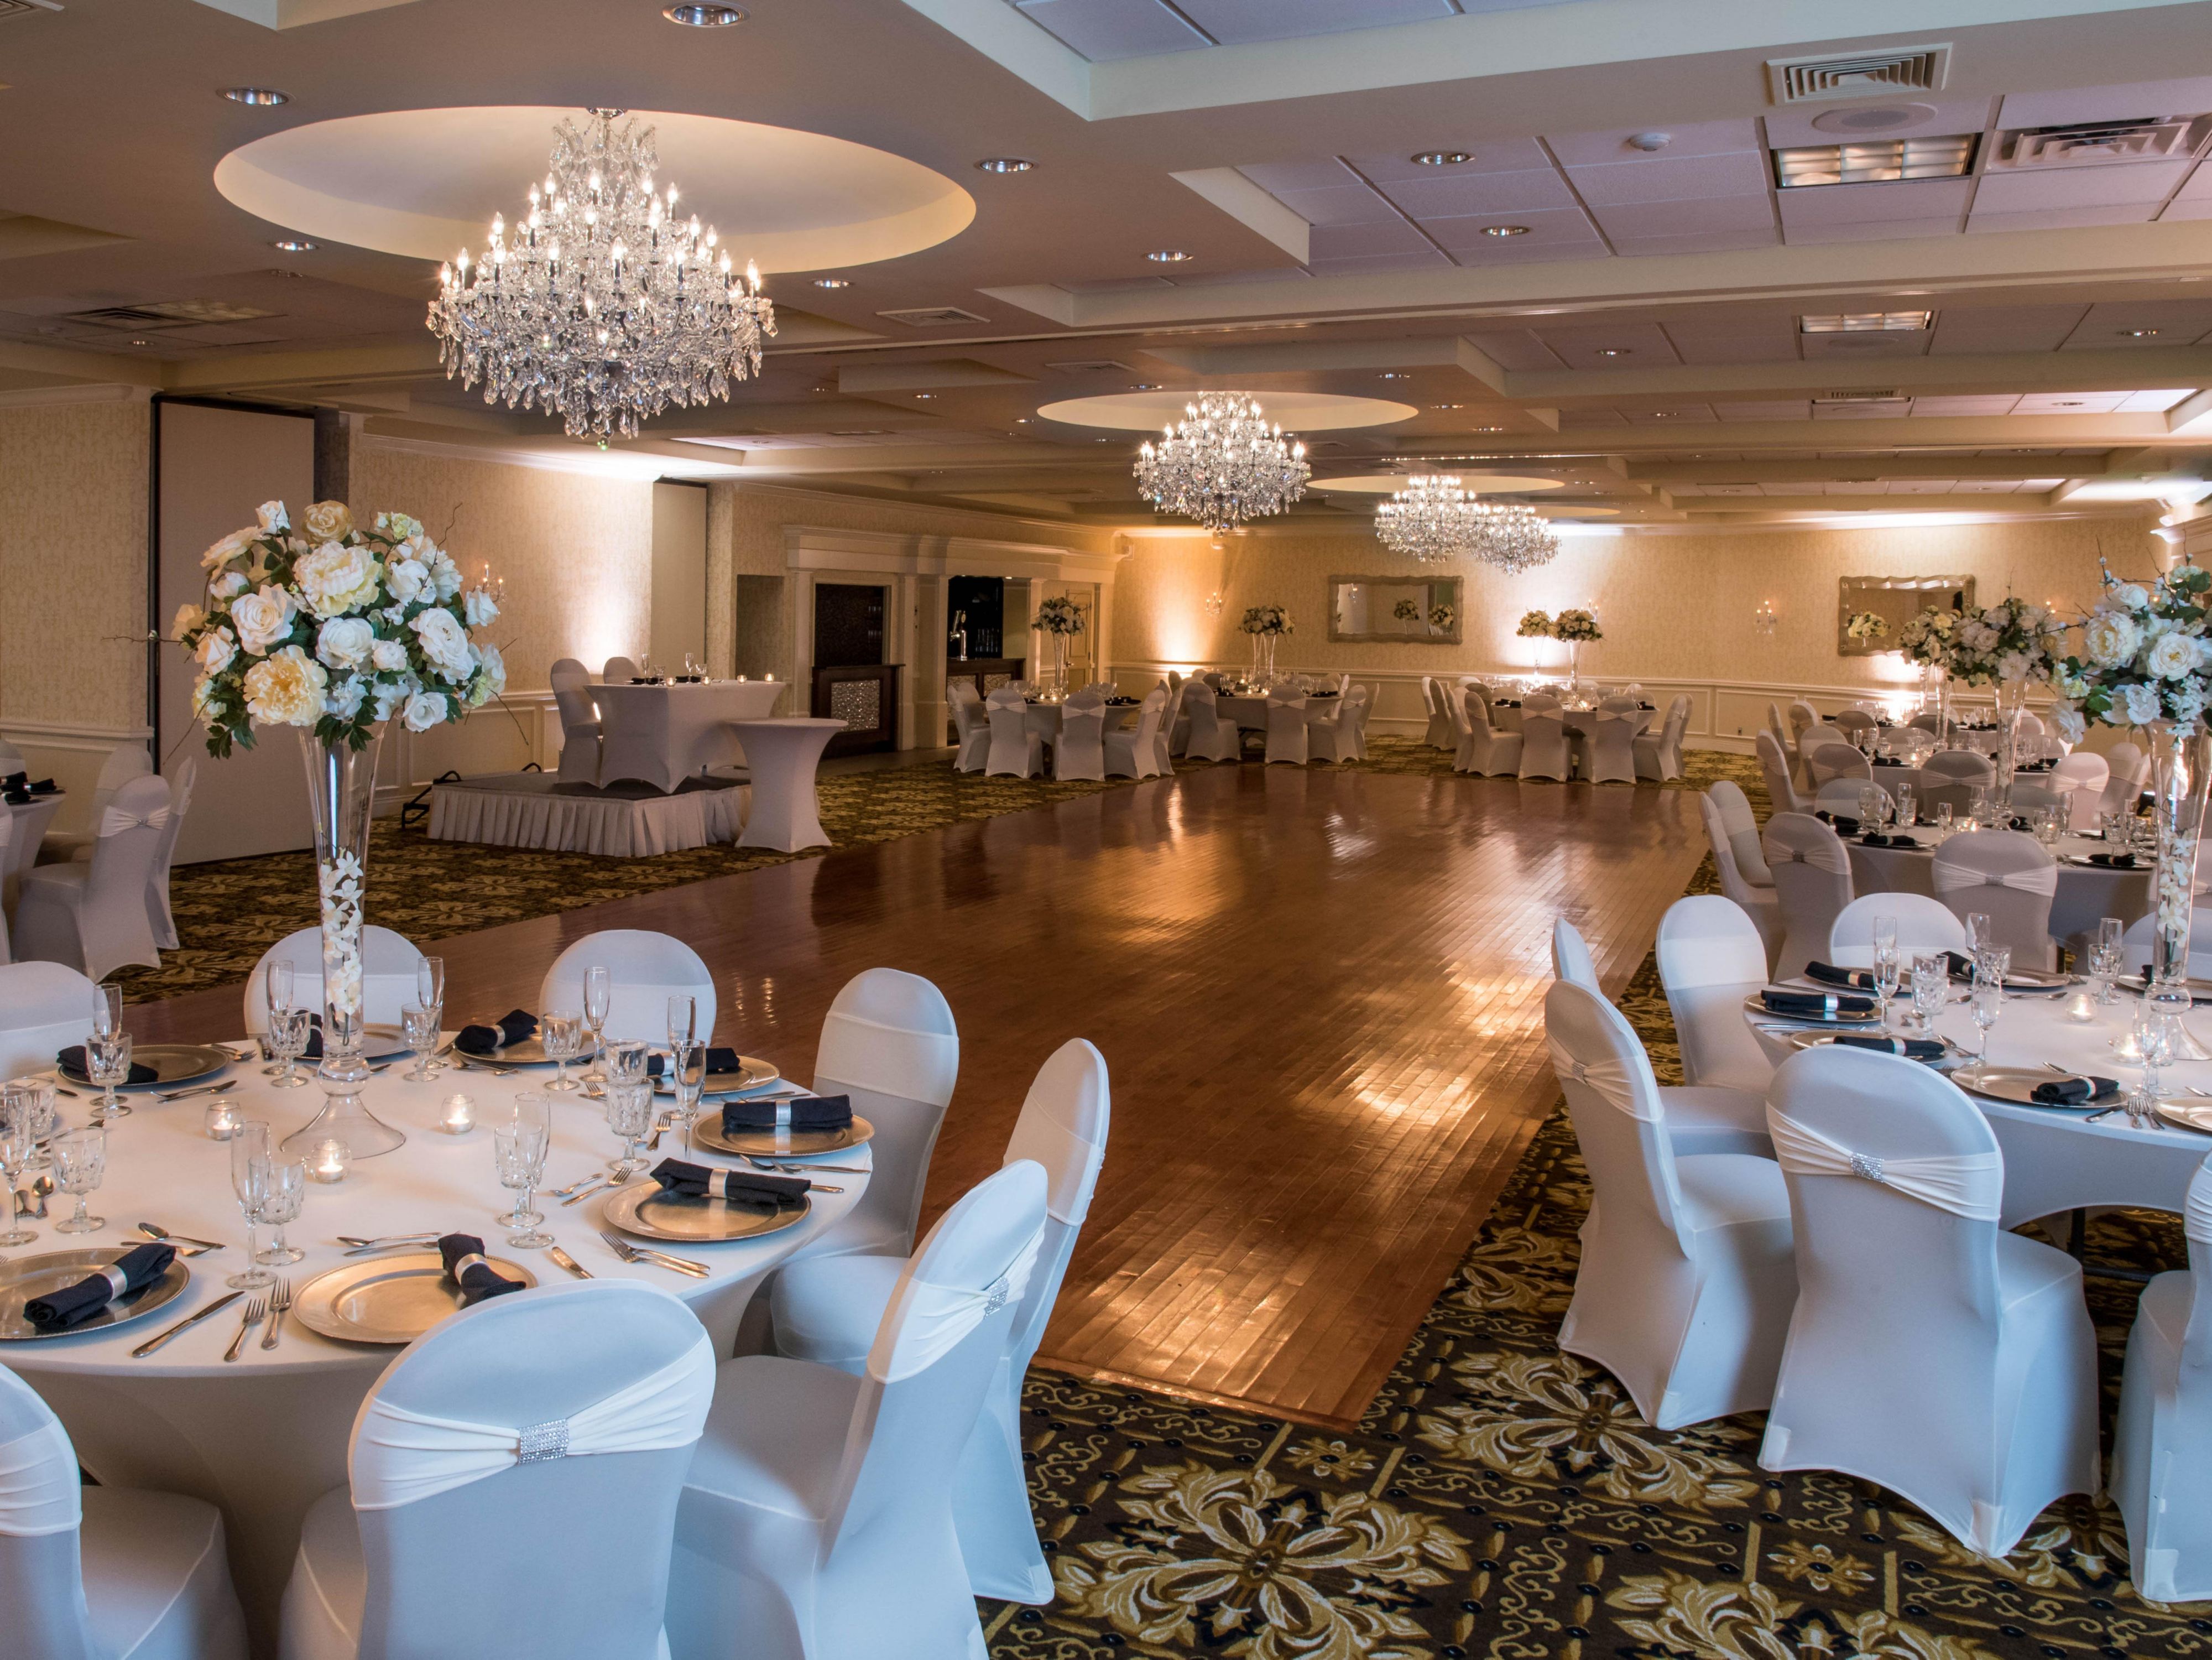 Our National Conference Center has 13 different meeting room setups to choose from including a tiered auditorium. The exquisite Windsor Ballroom is also available for events ranging from weddings and sweet 16 parties to bar and bat mitzvahs. Call now to confirm availability and pricing. 